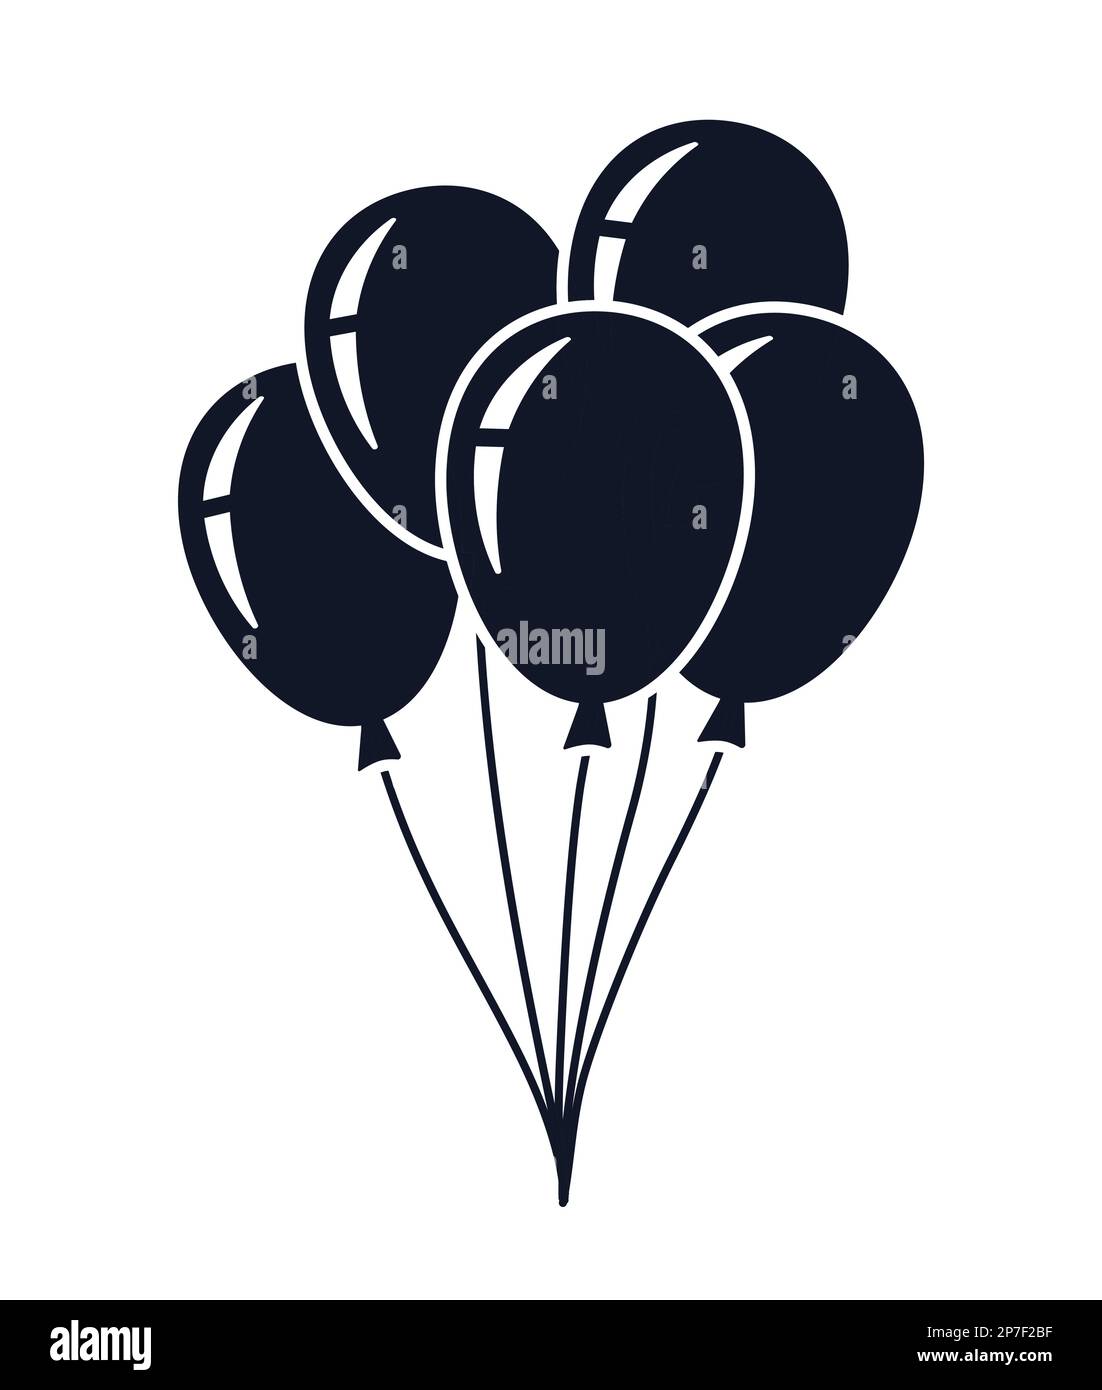 Party decoration balloons symbol flying bunch of balloons vector illustration icon Stock Vector